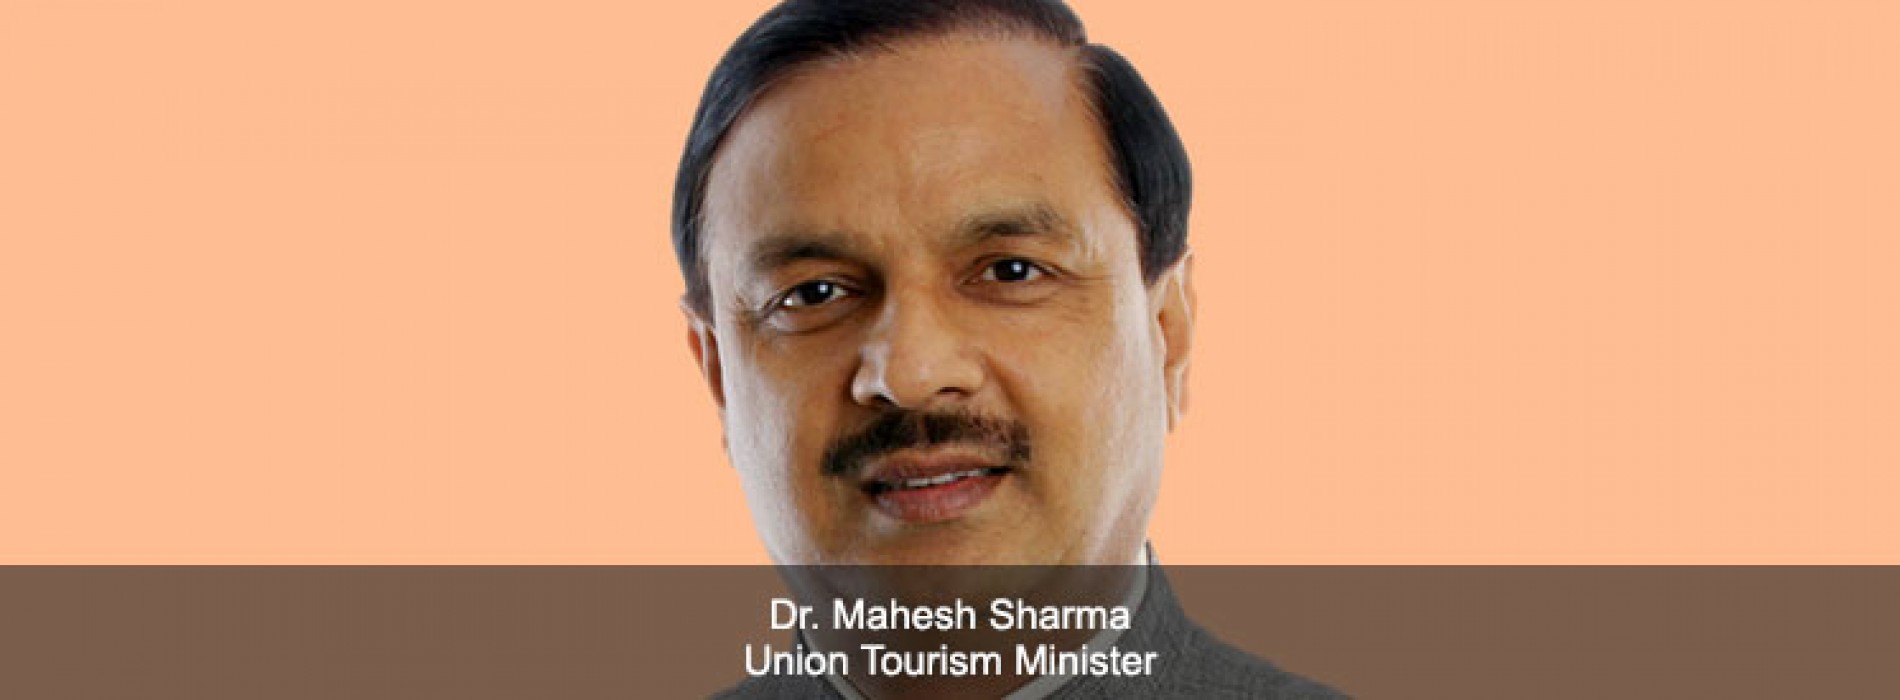 Dr. Mahesh Sharma asks IATO’s members to take benefit of its convention being held in Indore